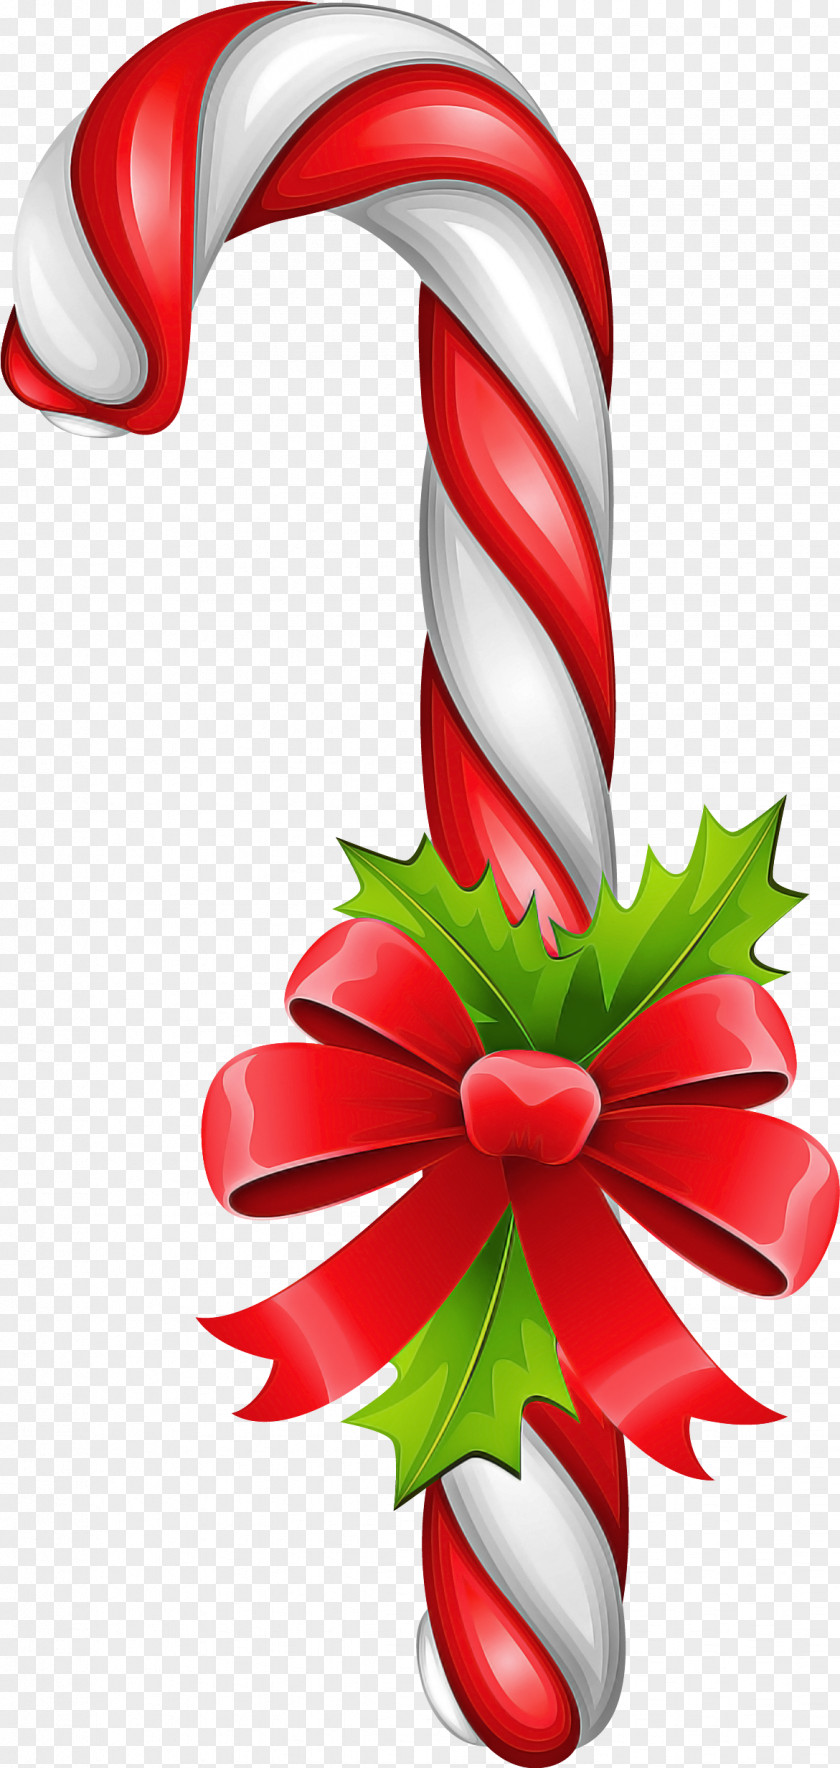 Holly Christmas Ornament Candy Cane PNG